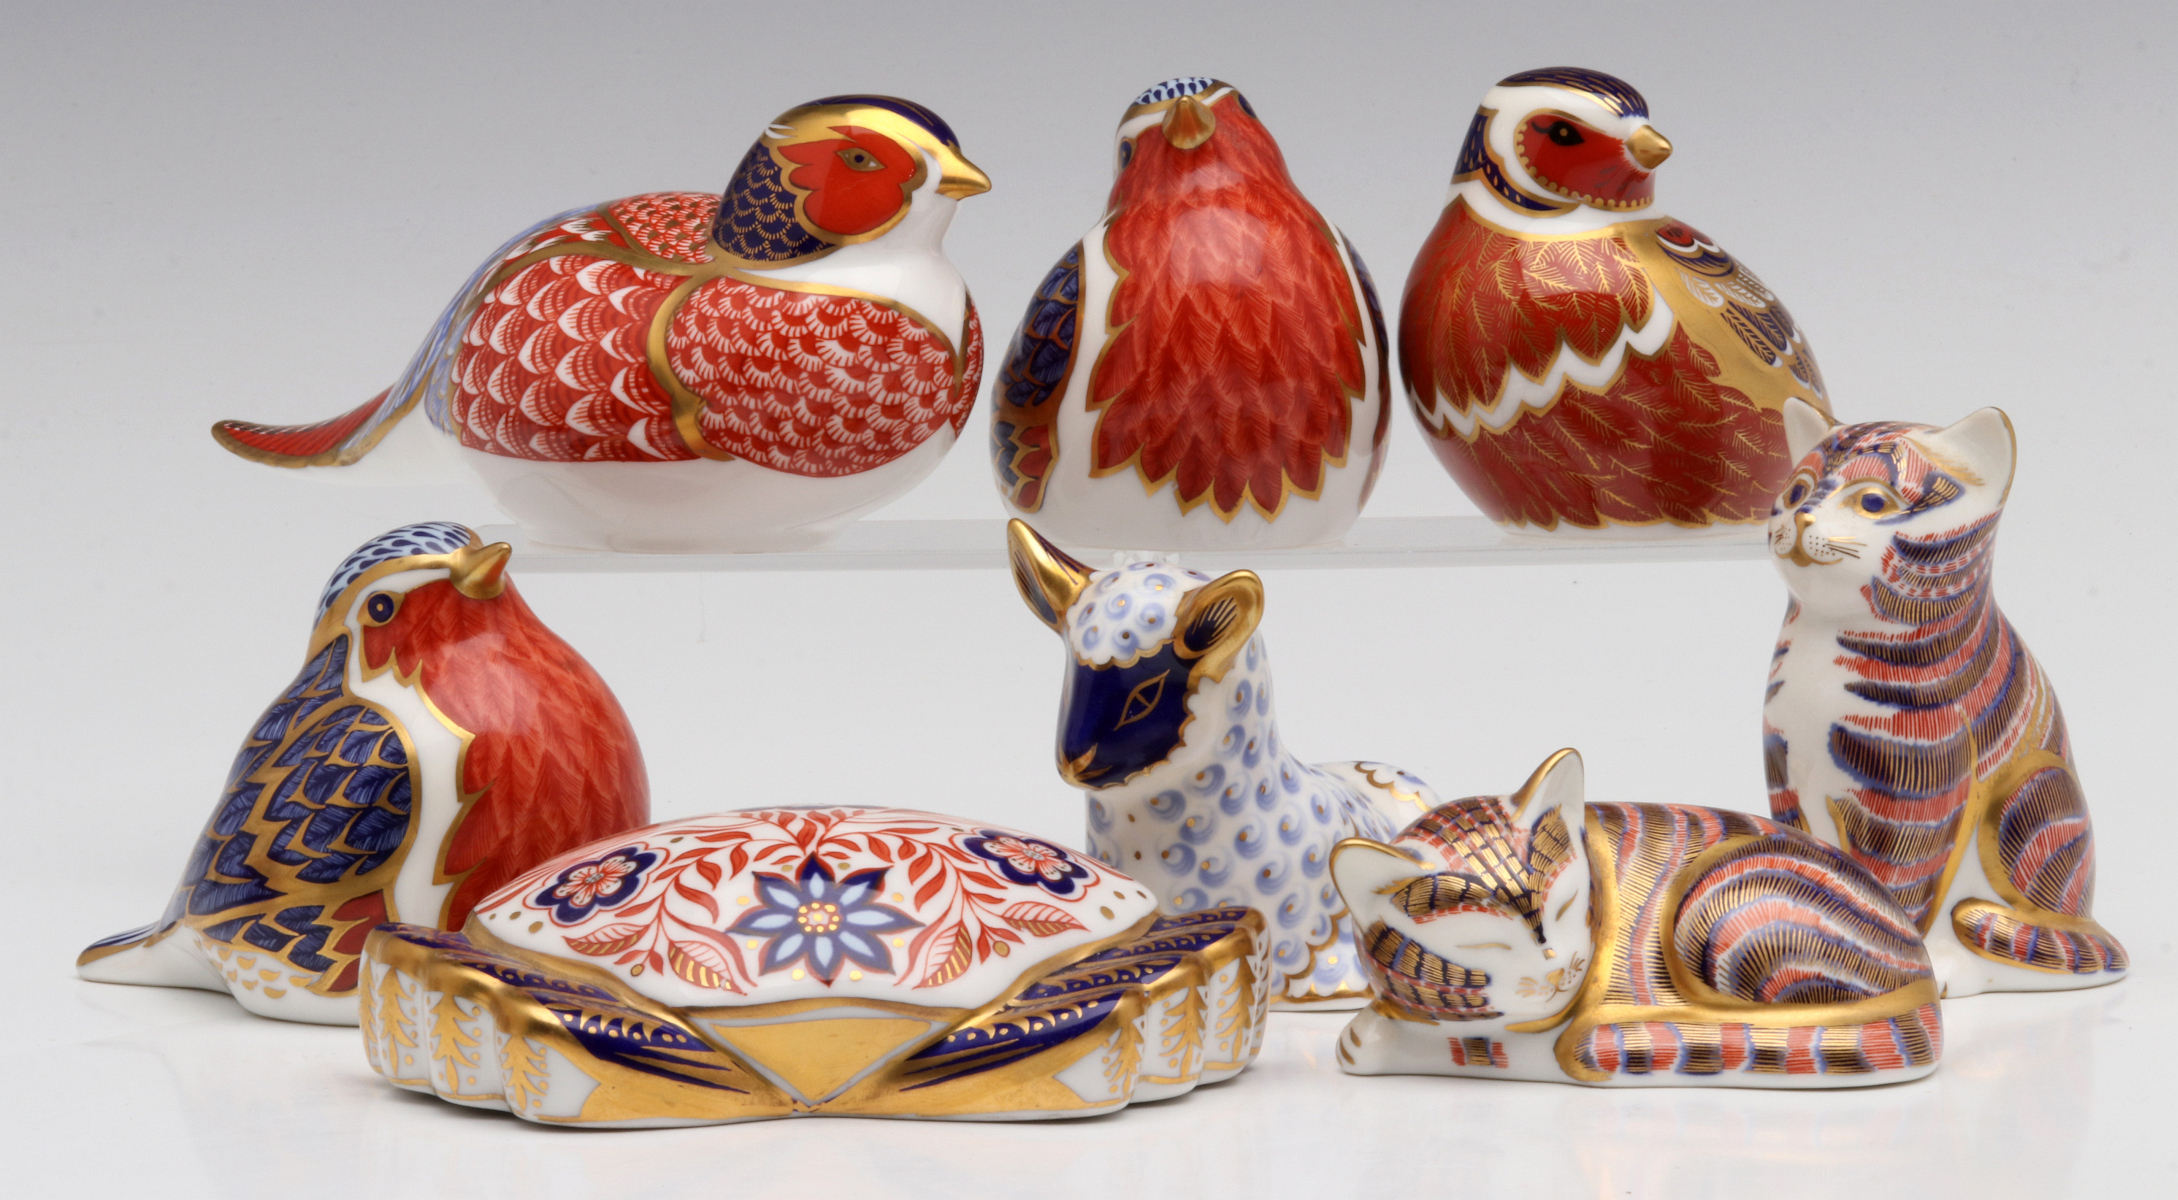 A COLLECTION OF 8 ROYAL CROWN DERBY PAPERWEIGHT FIGURES